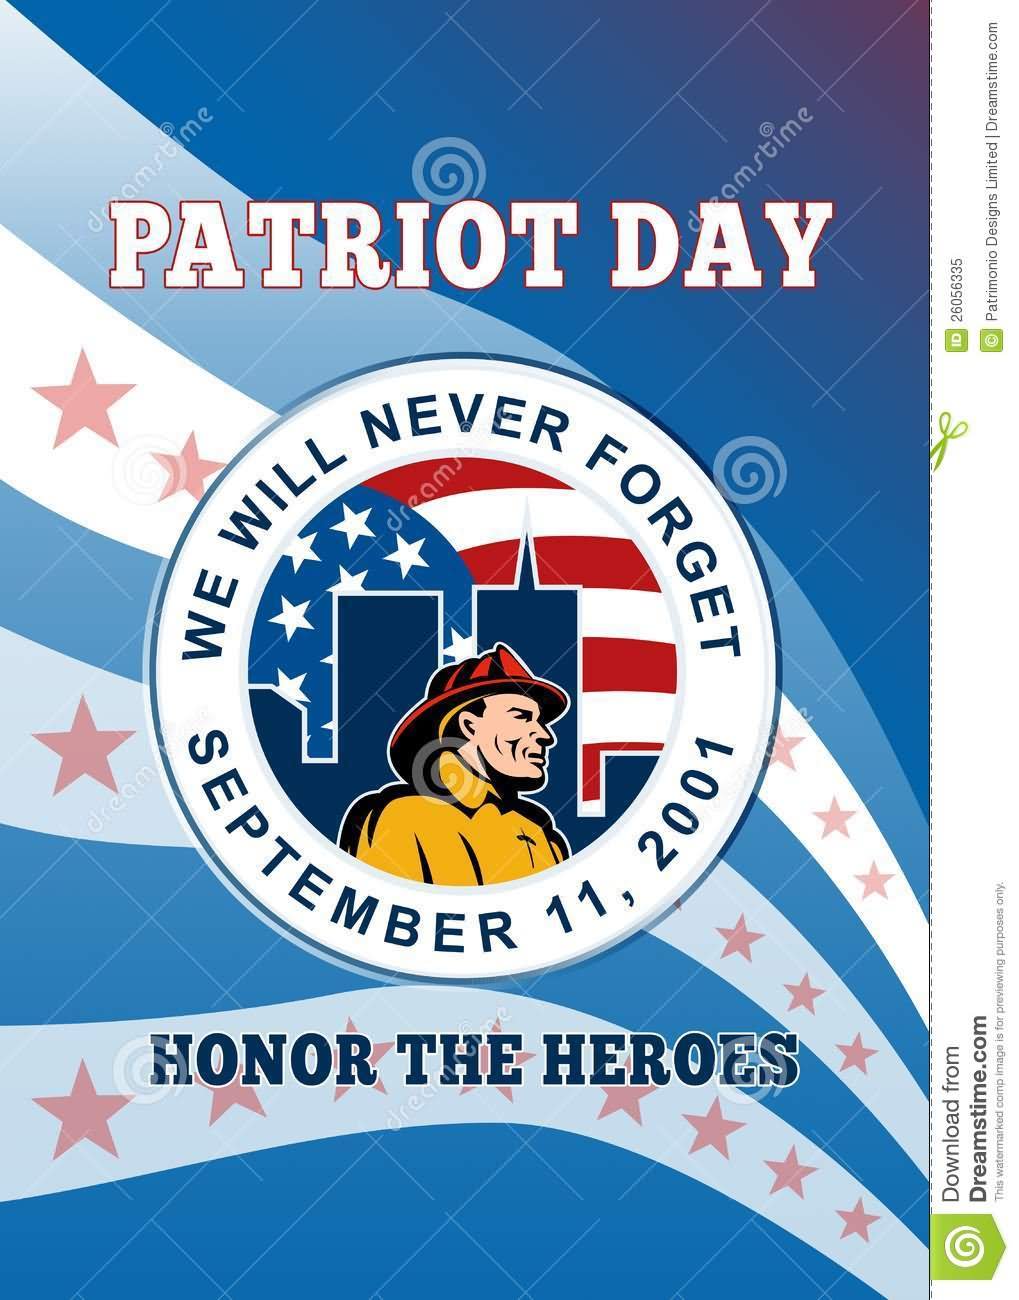 Patriot Day We Will Never Forget September 11, 2001 Honor The Heroes